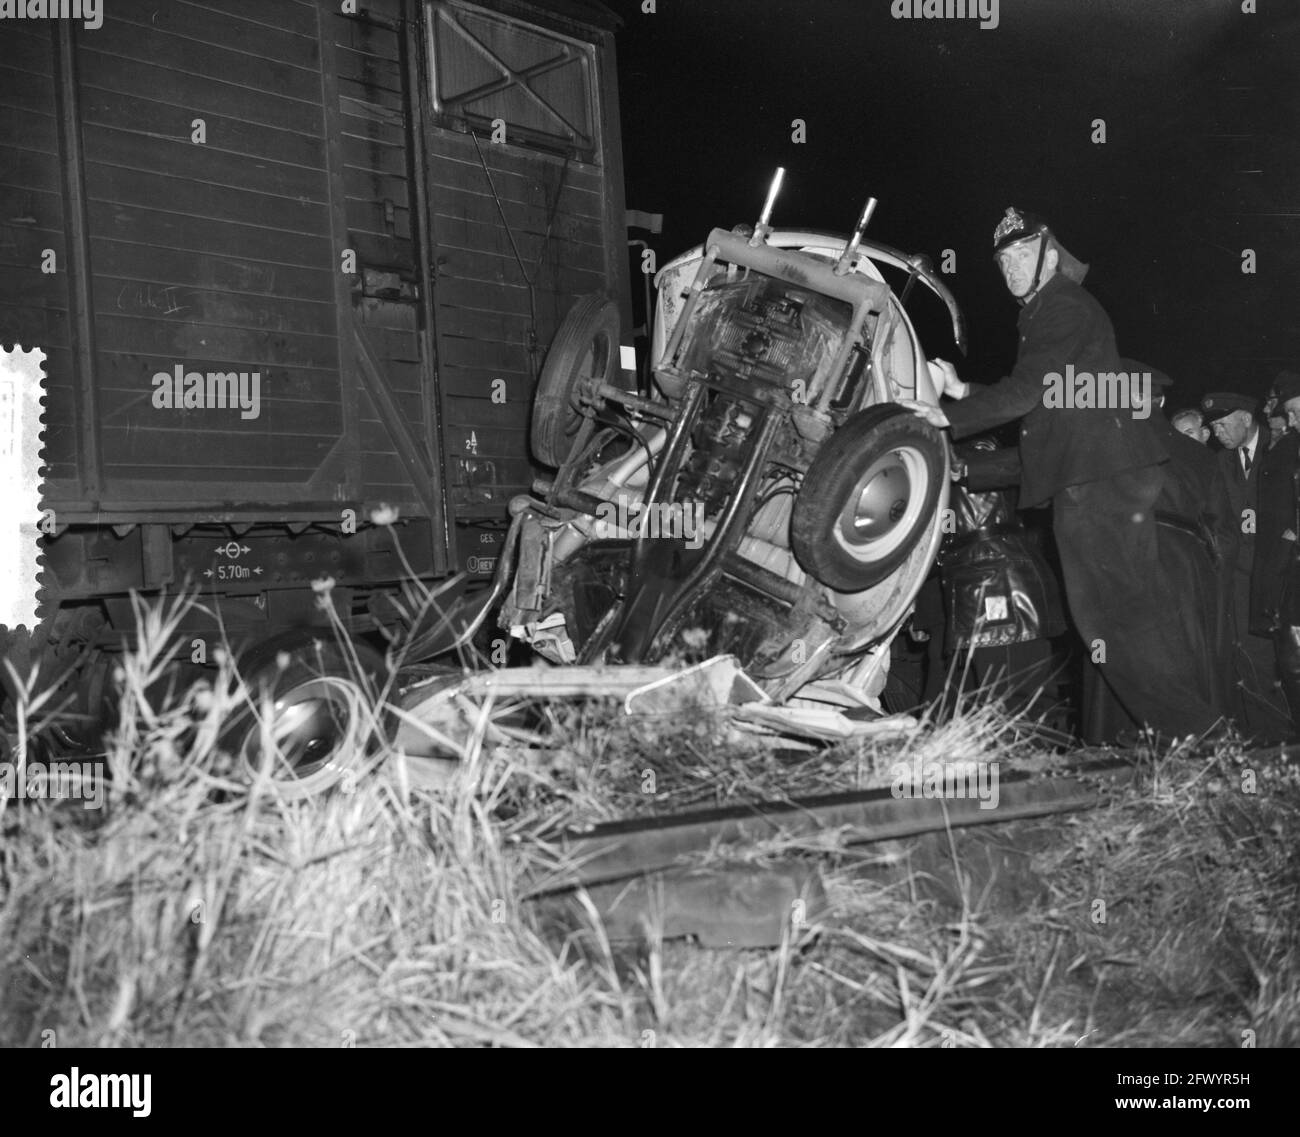 Auto-train accident Hemweg Amsterdam, November 16, 1959, Auto-train accidents, The Netherlands, 20th century press agency photo, news to remember, documentary, historic photography 1945-1990, visual stories, human history of the Twentieth Century, capturing moments in time Stock Photo